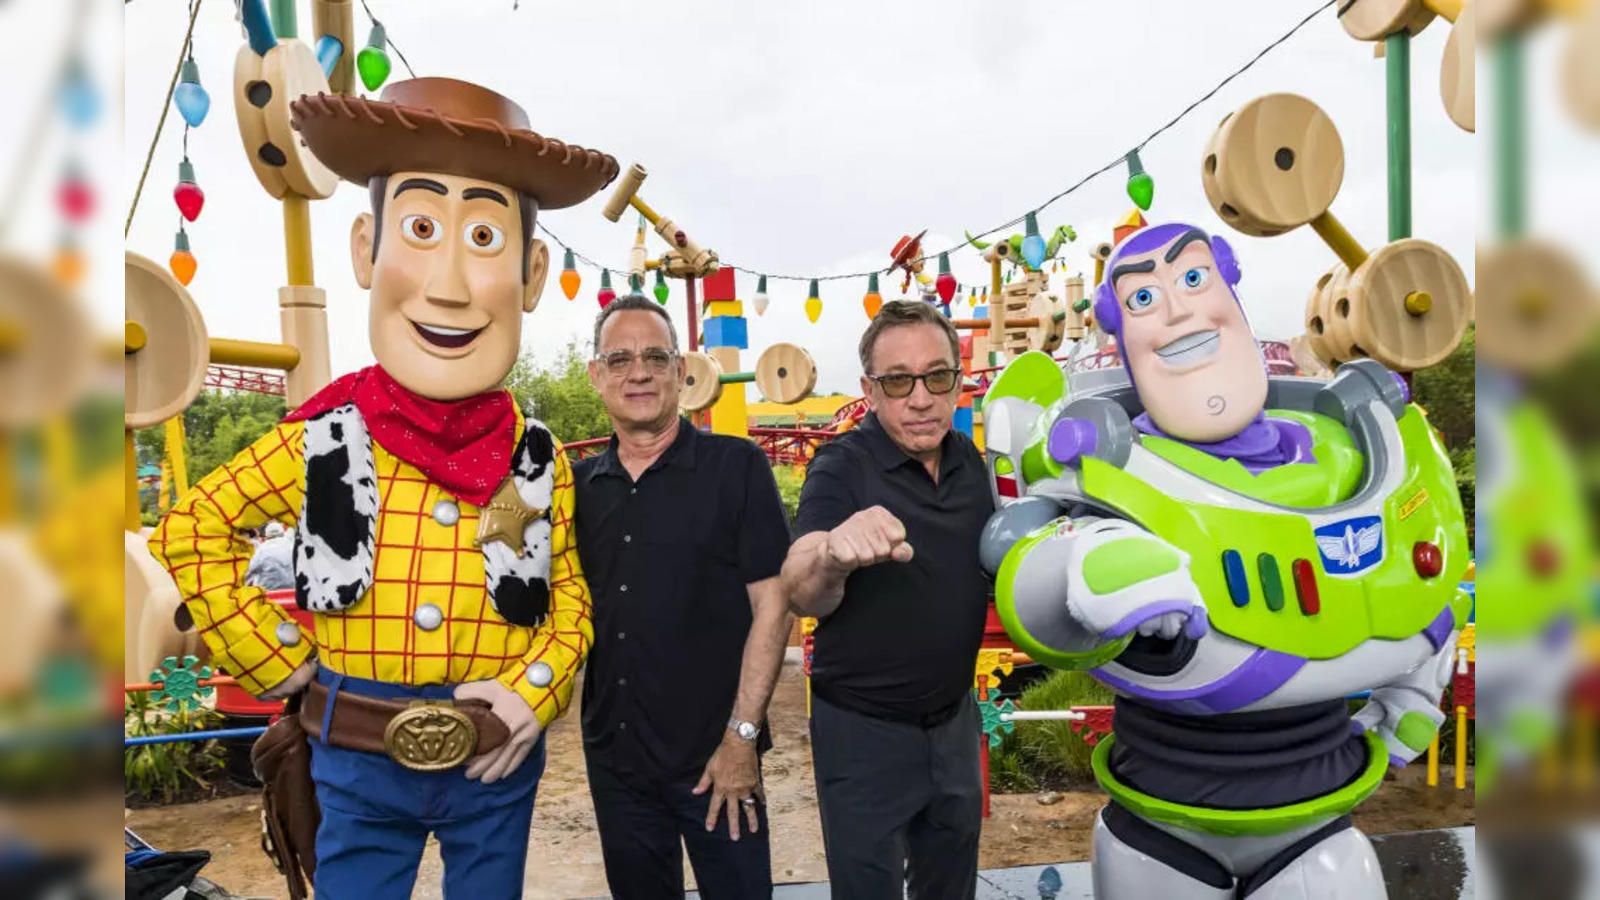 Toy Story 5 Release Date Rumors: When Is It Coming Out?